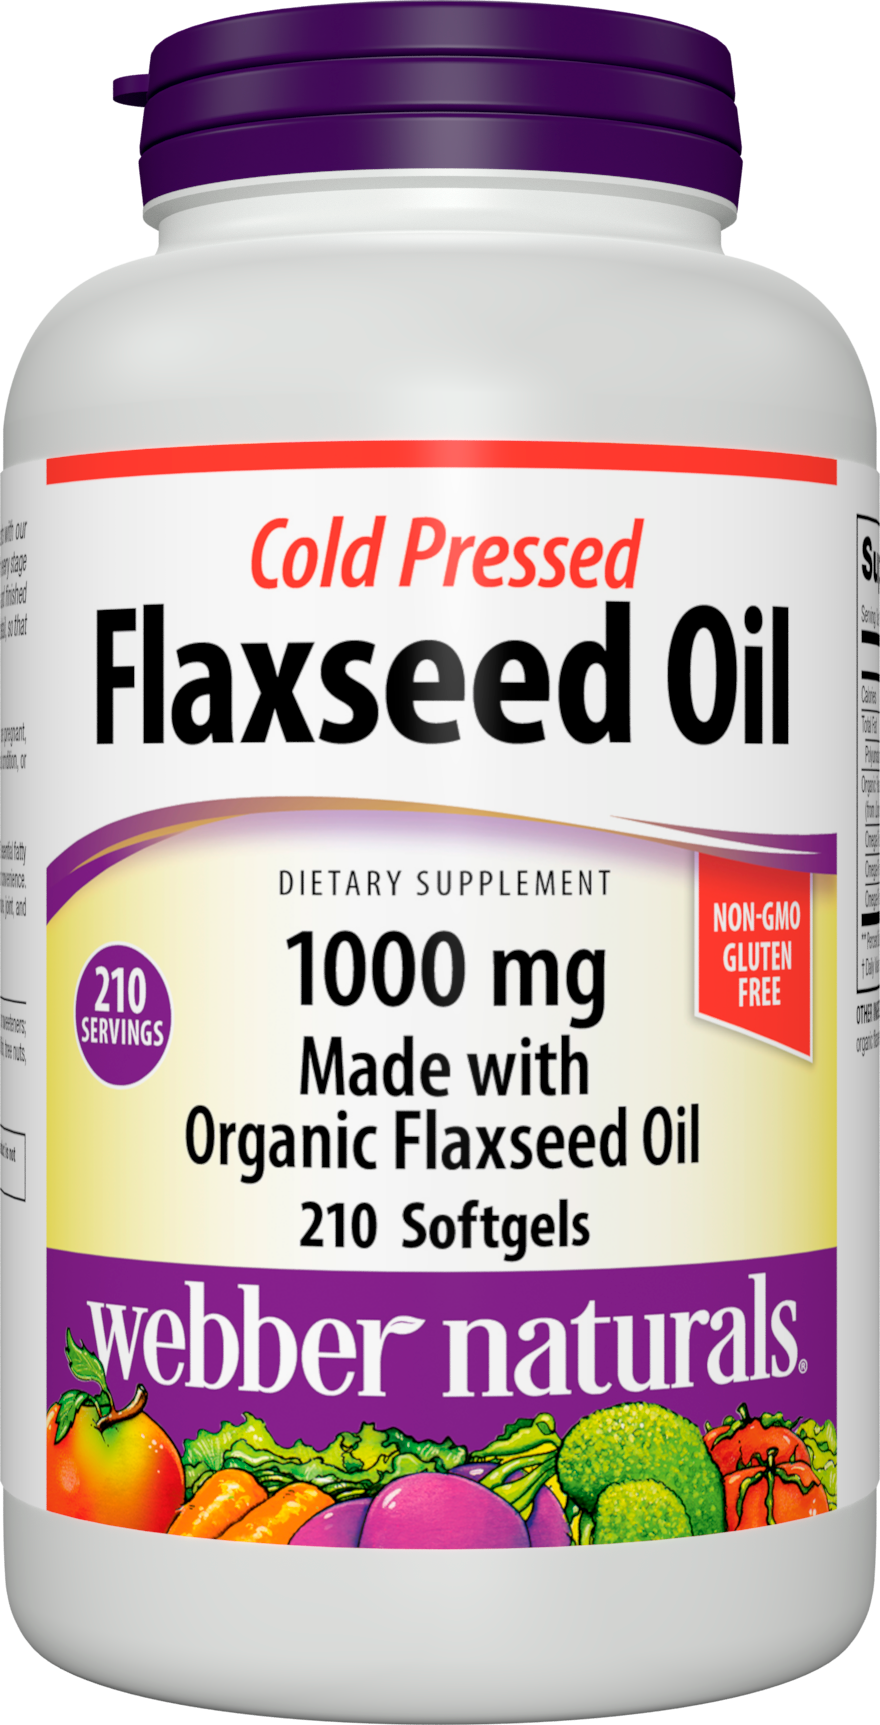 Webber Naturals Cold Pressed Flaxseed Oil 1000 mg, 210 Softgels, Plant Source Omega-3, Supports Heart, Brain, Joint, and Immune Health, Gluten and Dairy Free